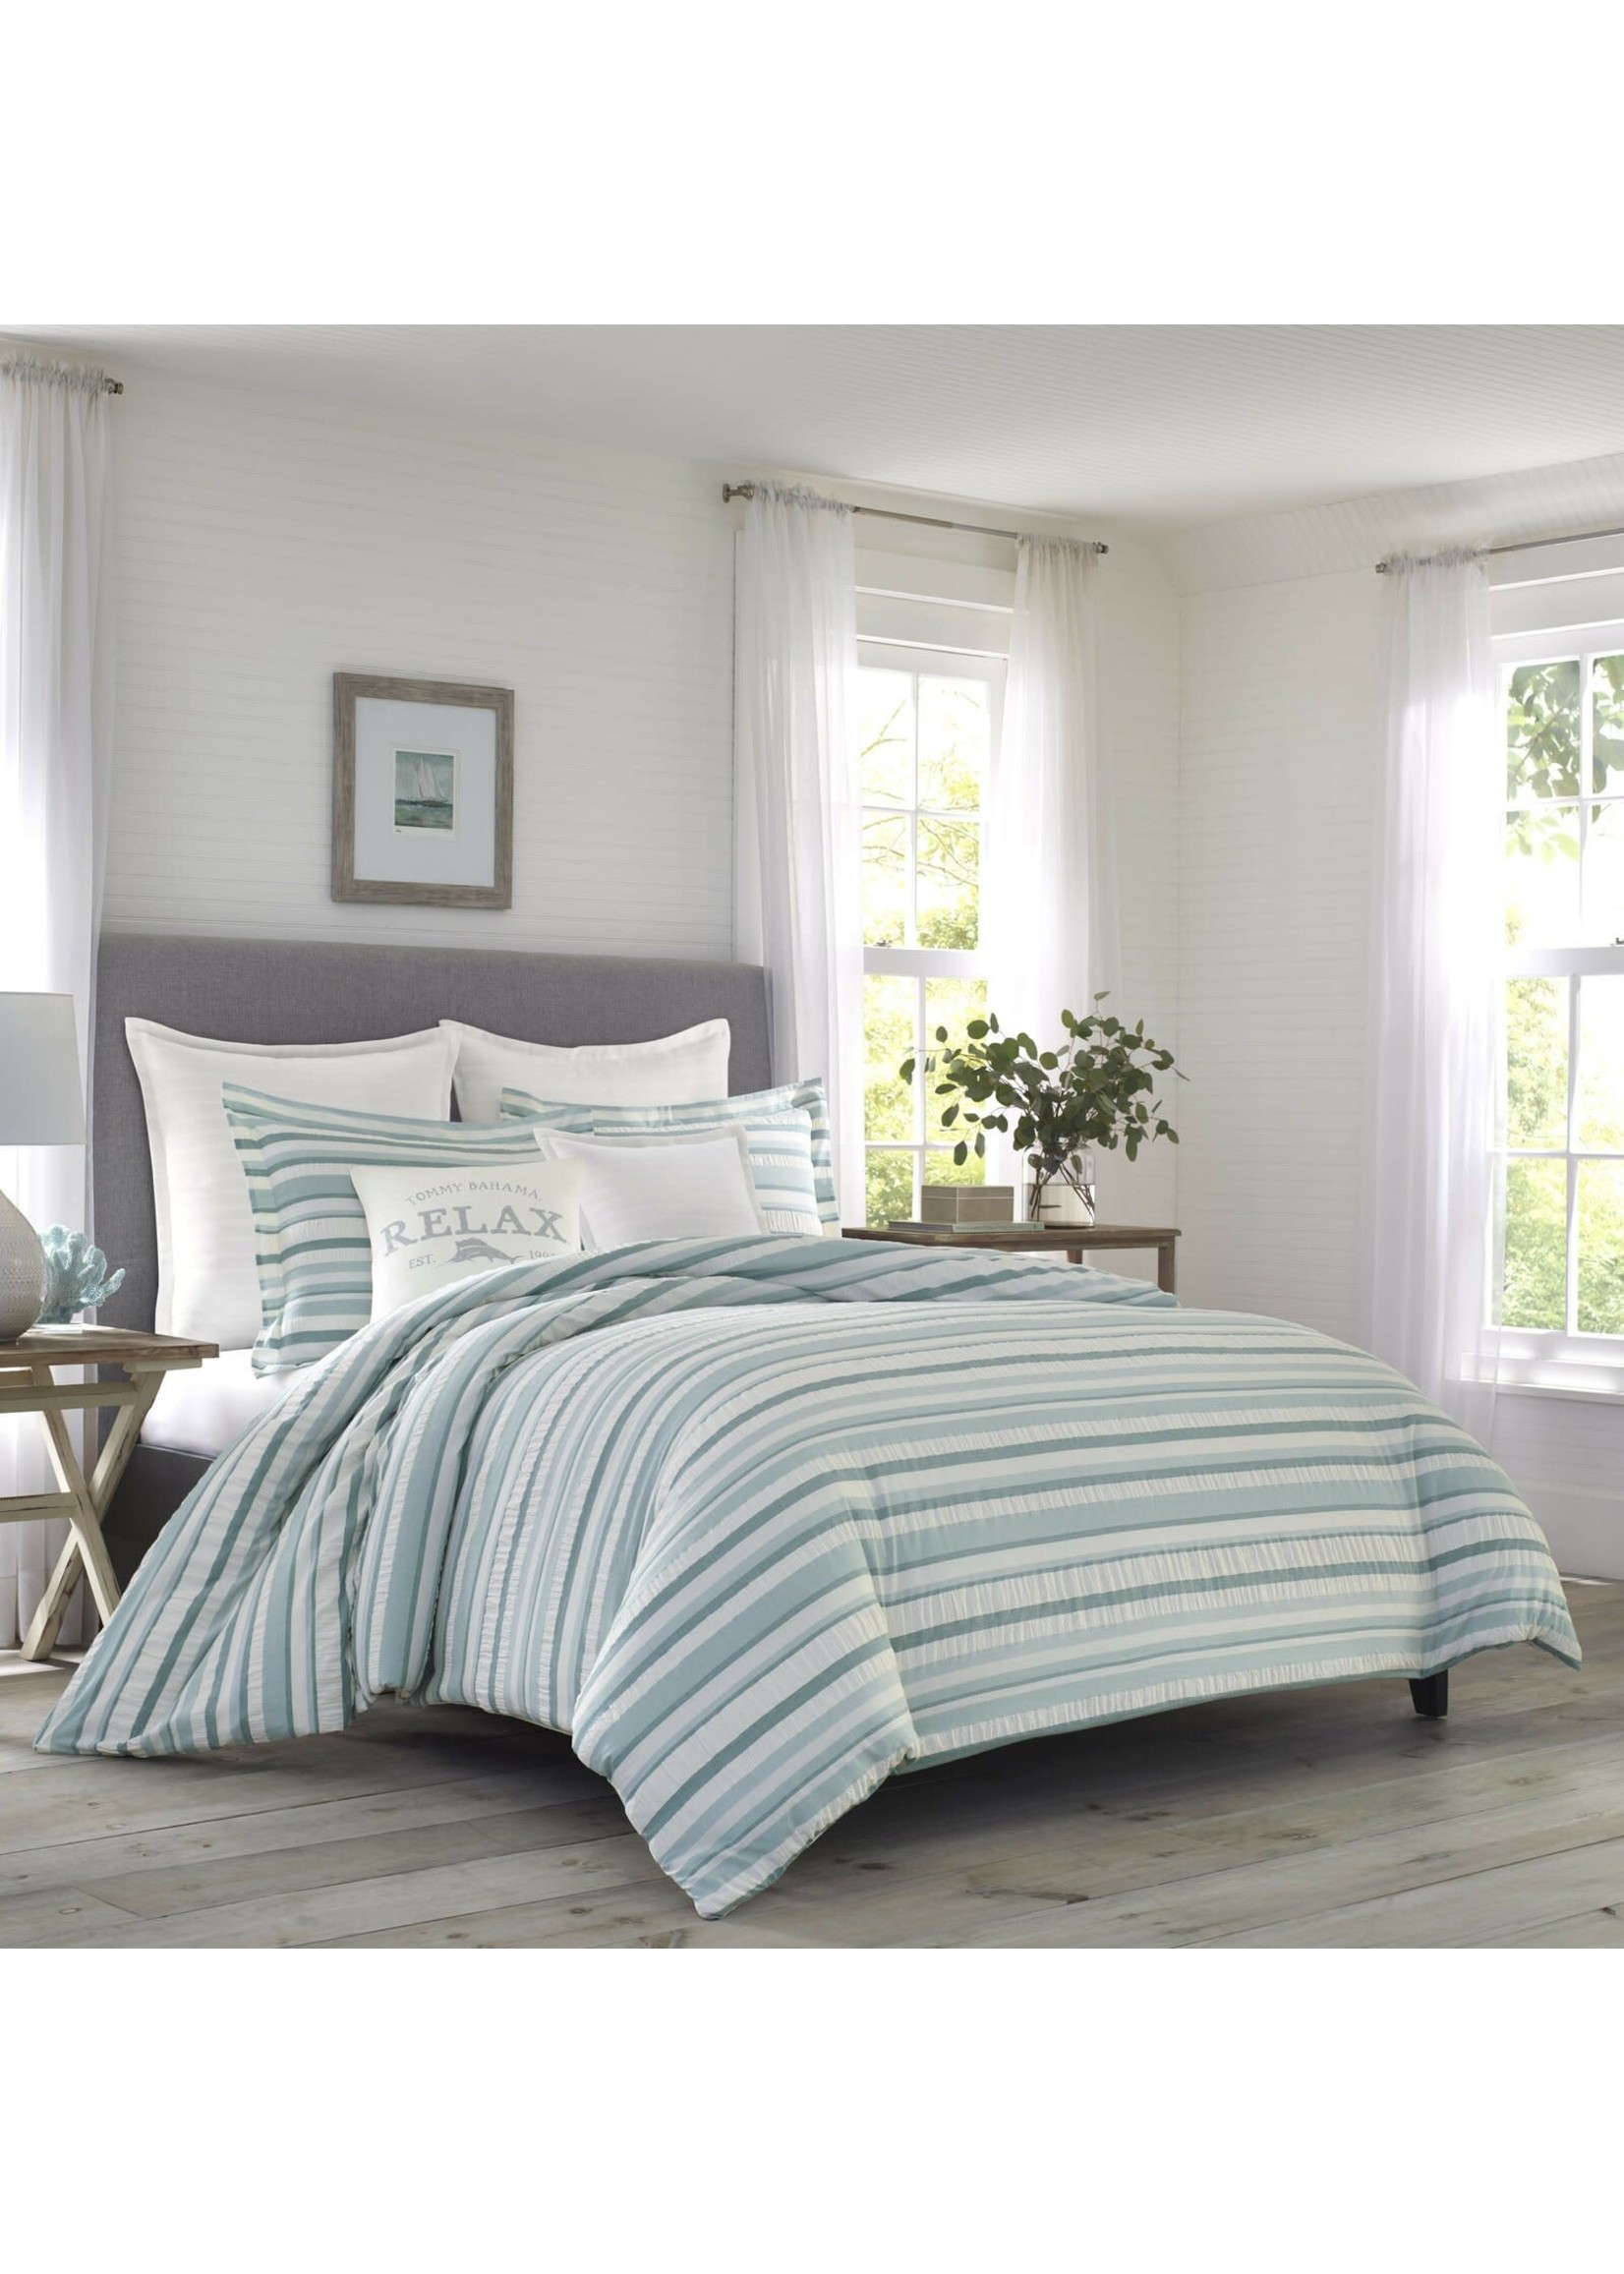 *King - Clearwater Cay Relax Reversible Duvet Cover Set - Final Sale